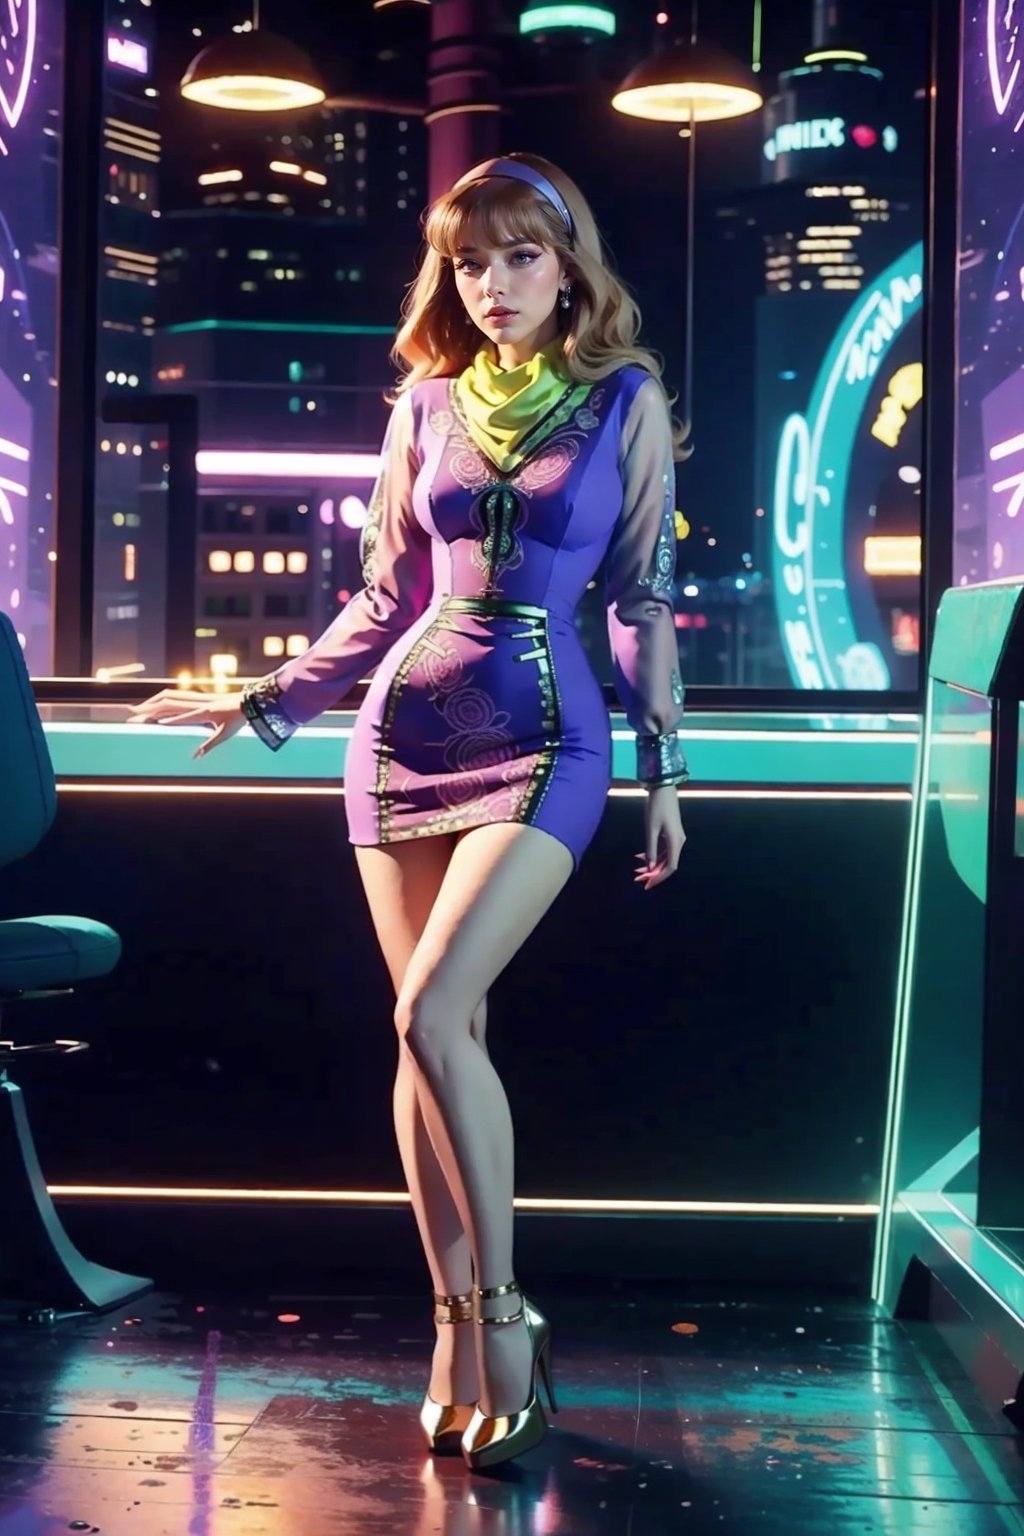 intense make-up, medium sized breasts, 
Caucasian pretty Woman. Oval face. Bridgestone red hairstyle. Short long-sleeved purple cotton futuristic dress with mauve cuffs and hem. Mauve ring below waist. Green scarf, mauve headband. Mauve high heels.
outfit with golden and neon intricate futuristic details,hourglass body shape,thin Futuristic room,daphneblake